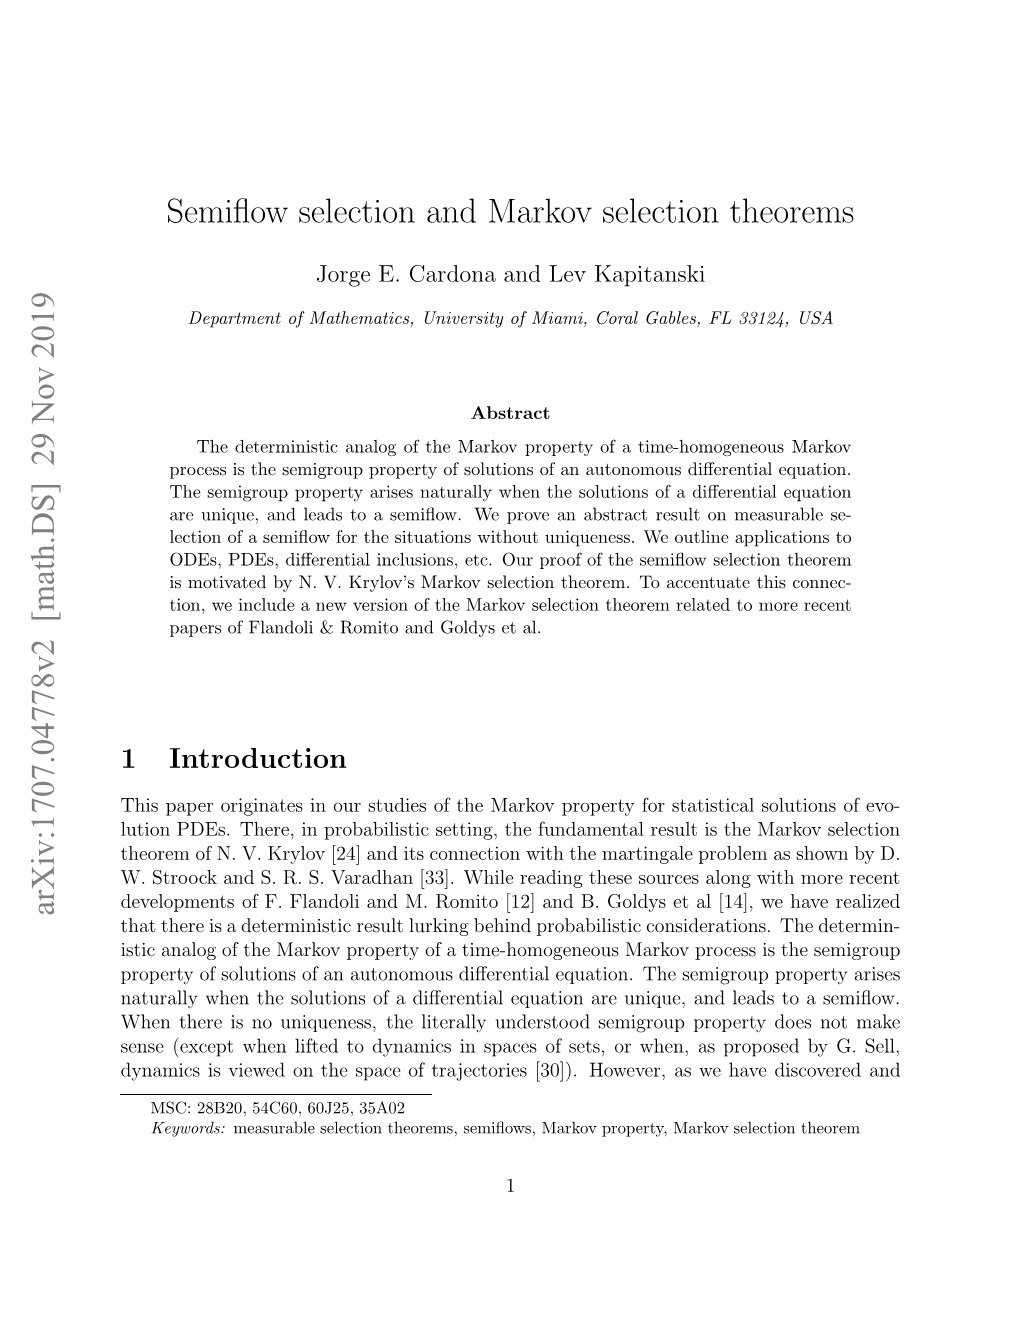 Semiflow Selection and Markov Selection Theorems